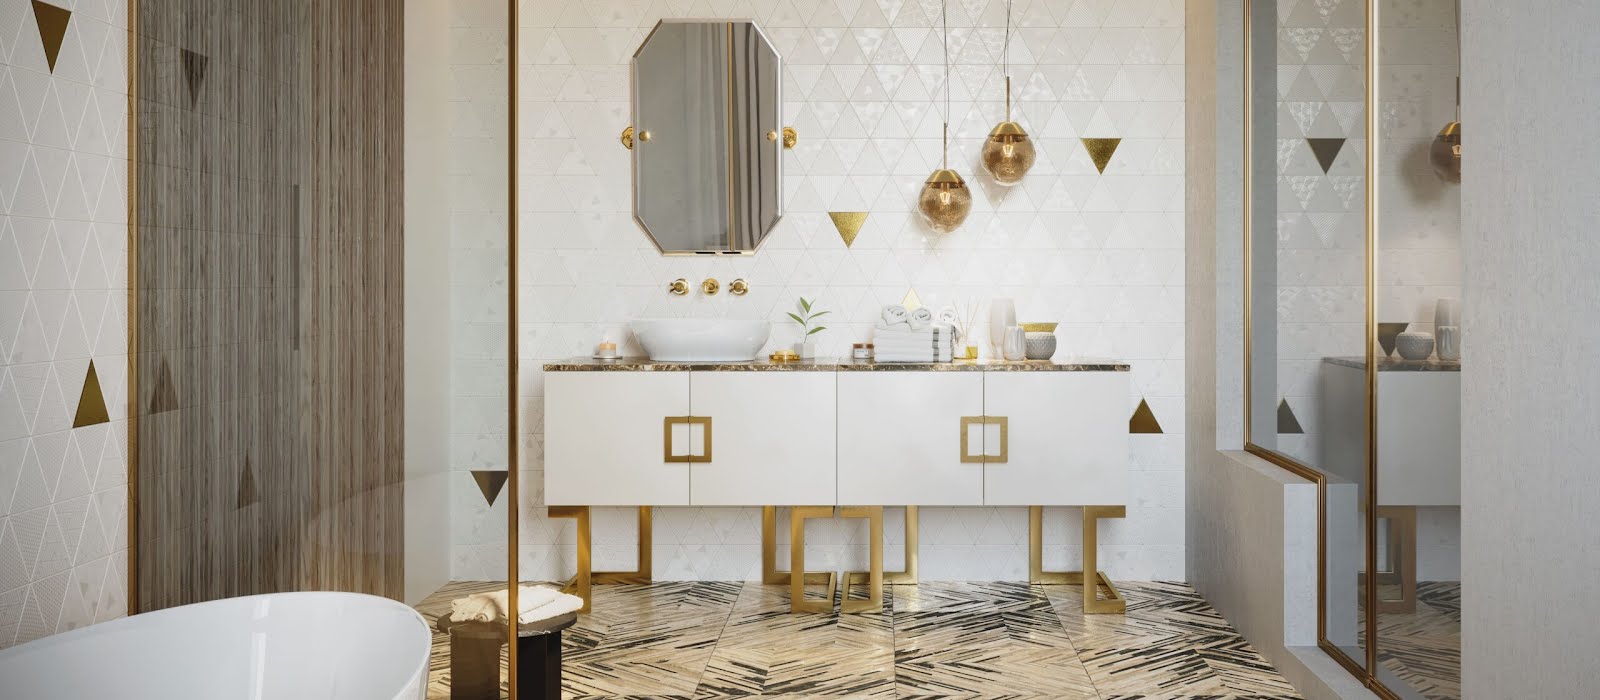 Redecorating your bathroom? Here are some gorgeous tile designs to get you started